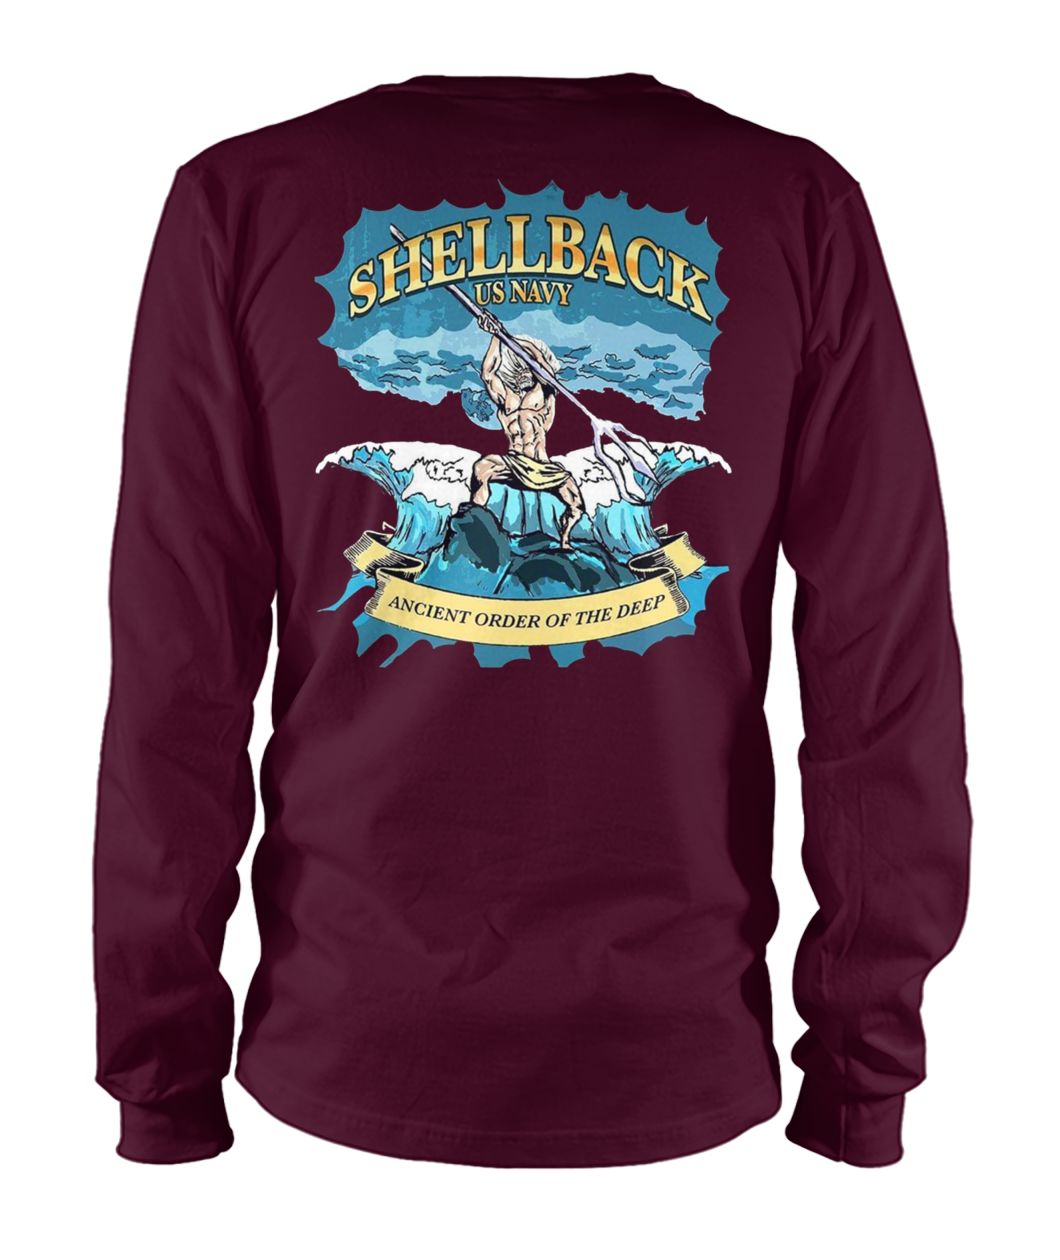 US navy shellback ancient order of the deep unisex long sleeve